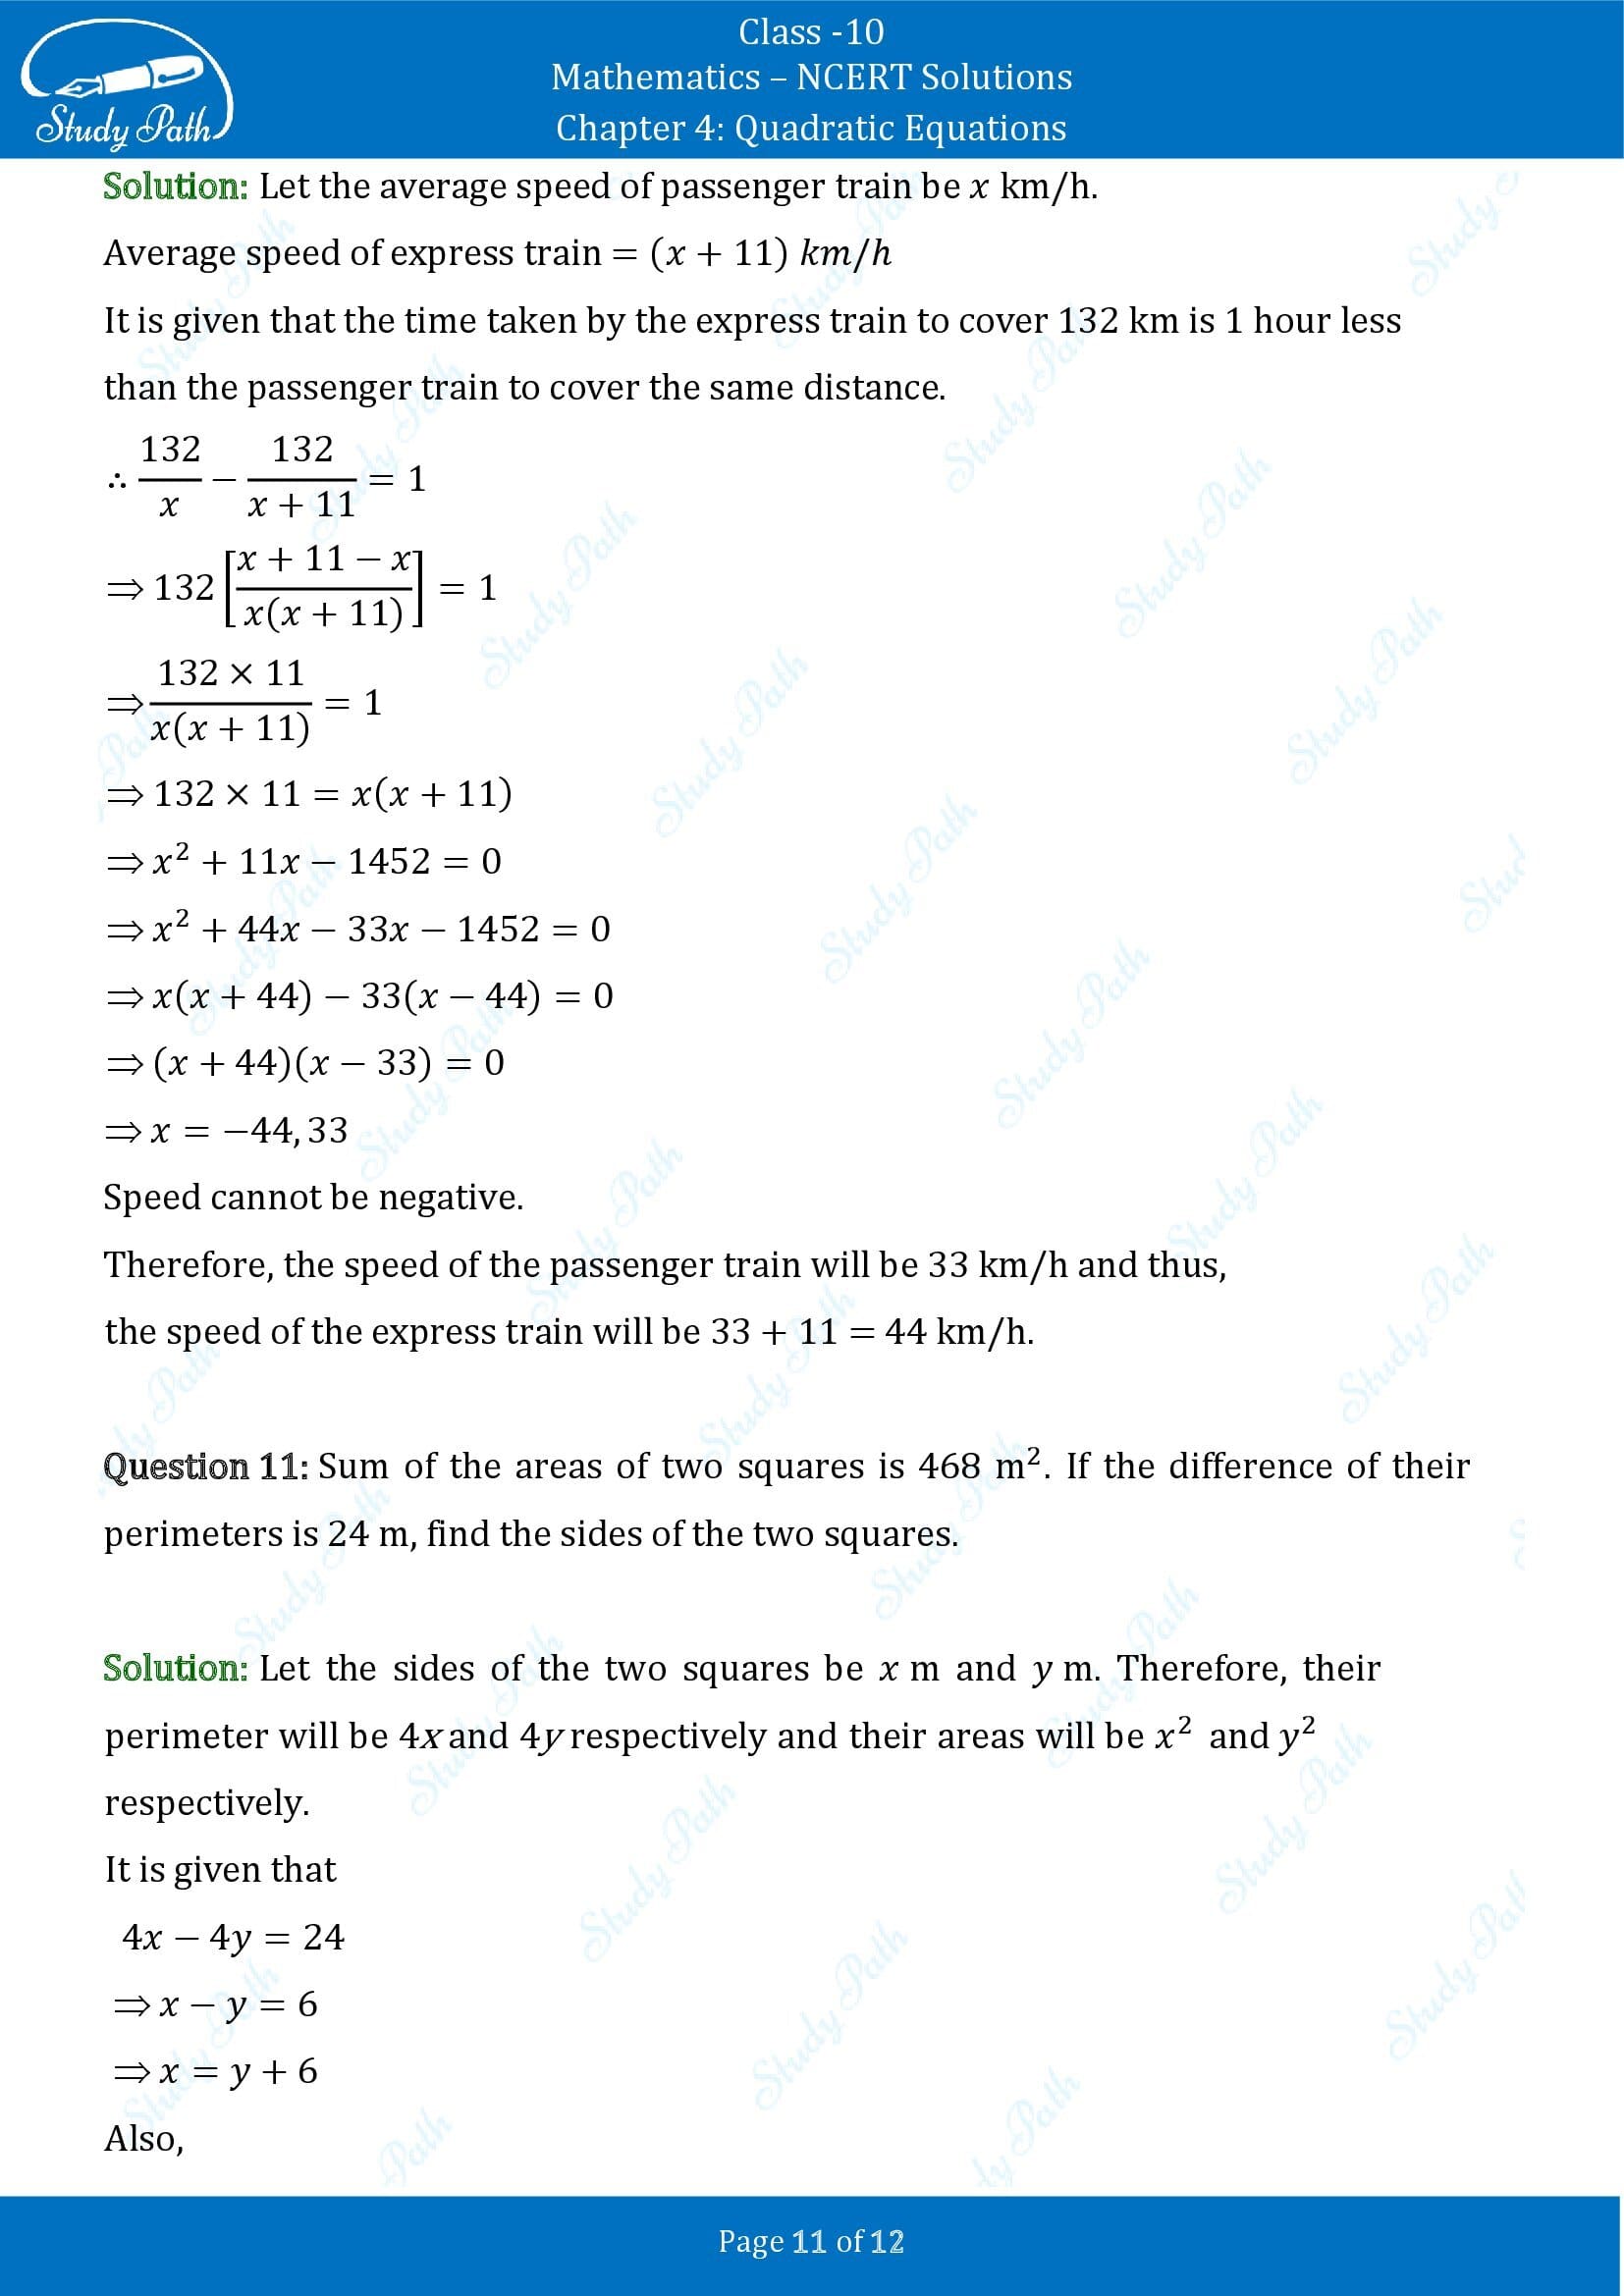 NCERT Solutions for Class 10 Maths Chapter 4 Quadratic Equations Exercise 4.3 0011